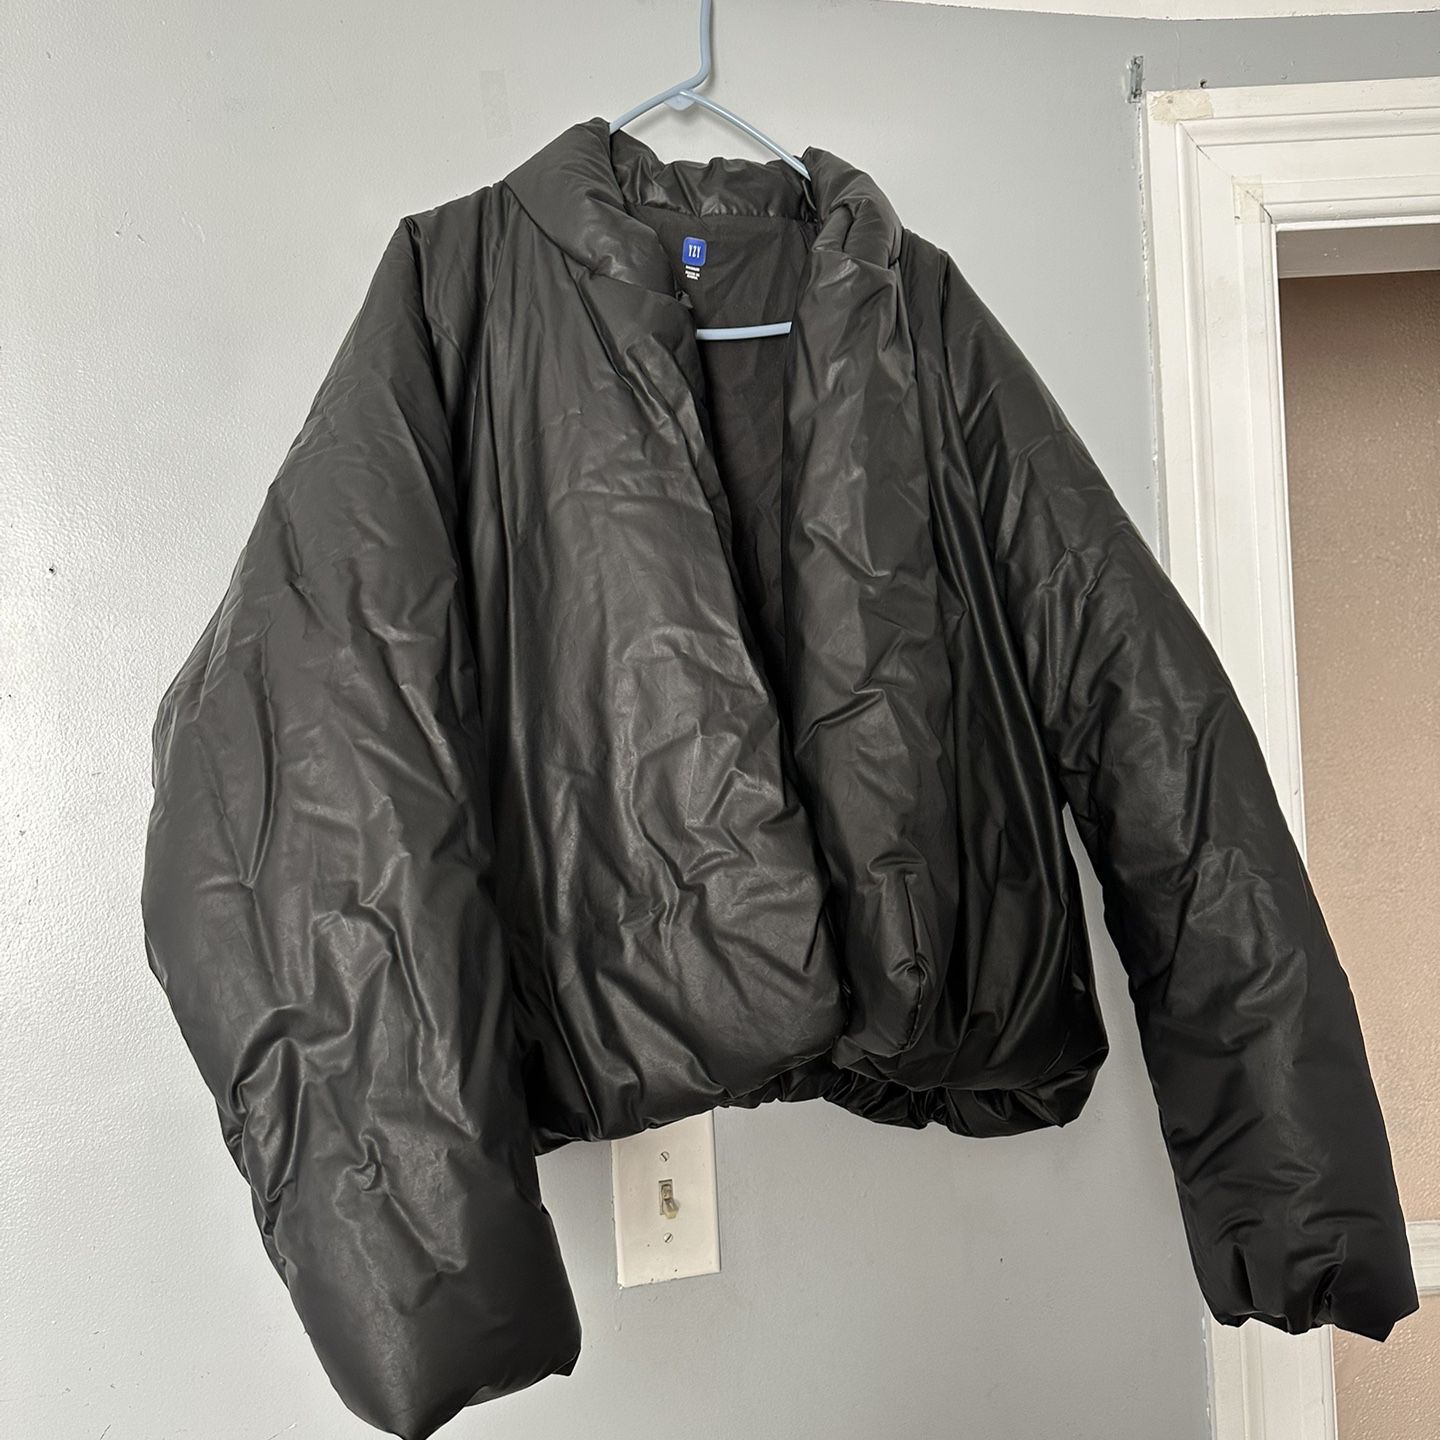 Yeezy GAP Round Jacket 2 for Sale in Brooklyn, NY - OfferUp